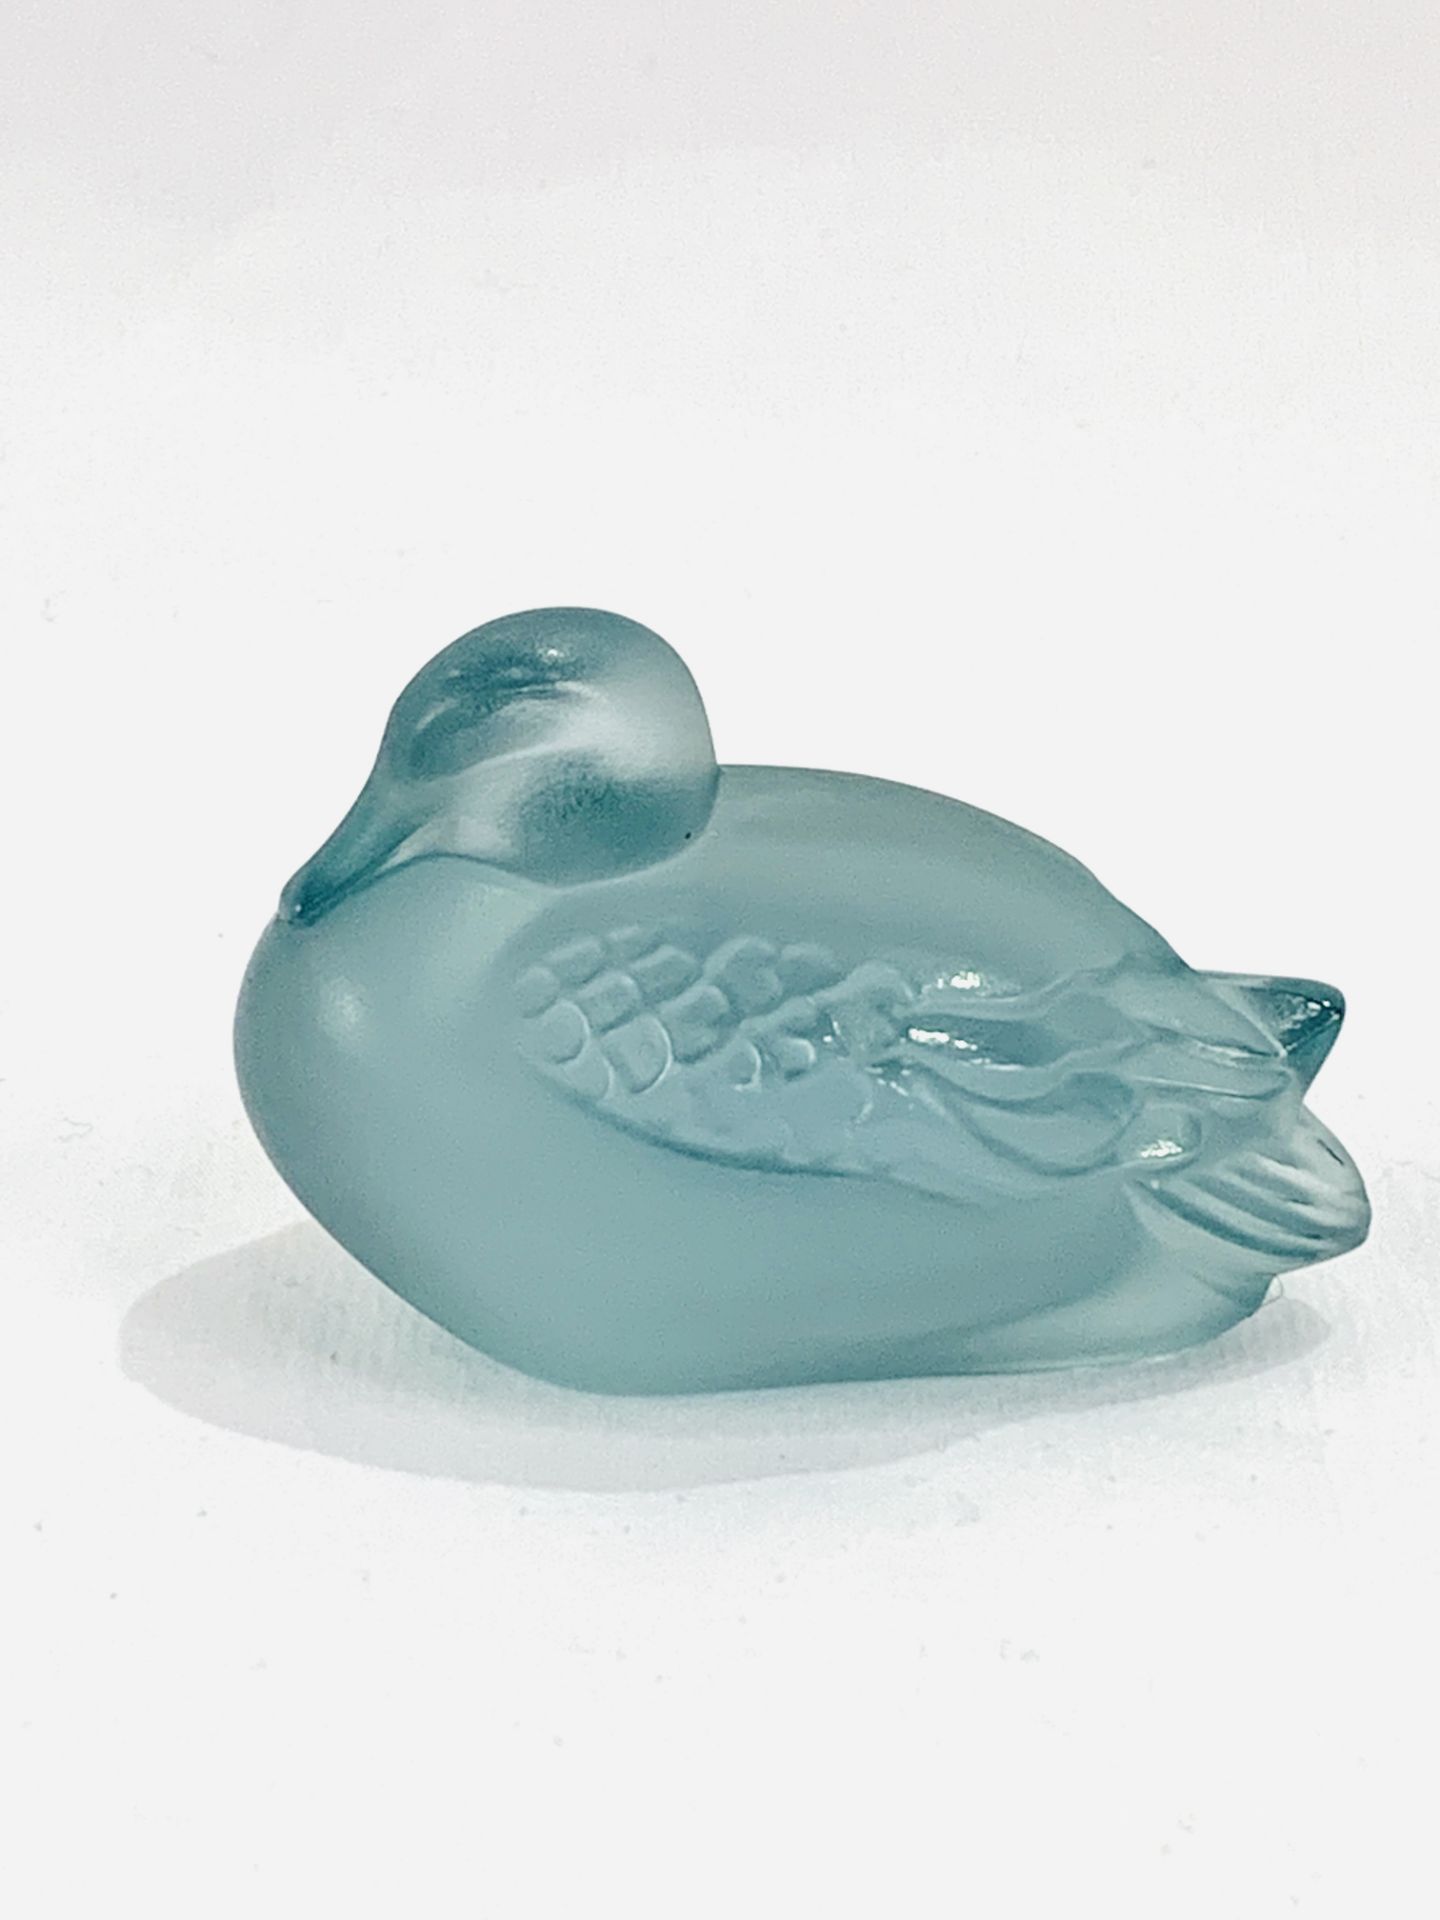 Lalique glass duck figurine - Image 2 of 4